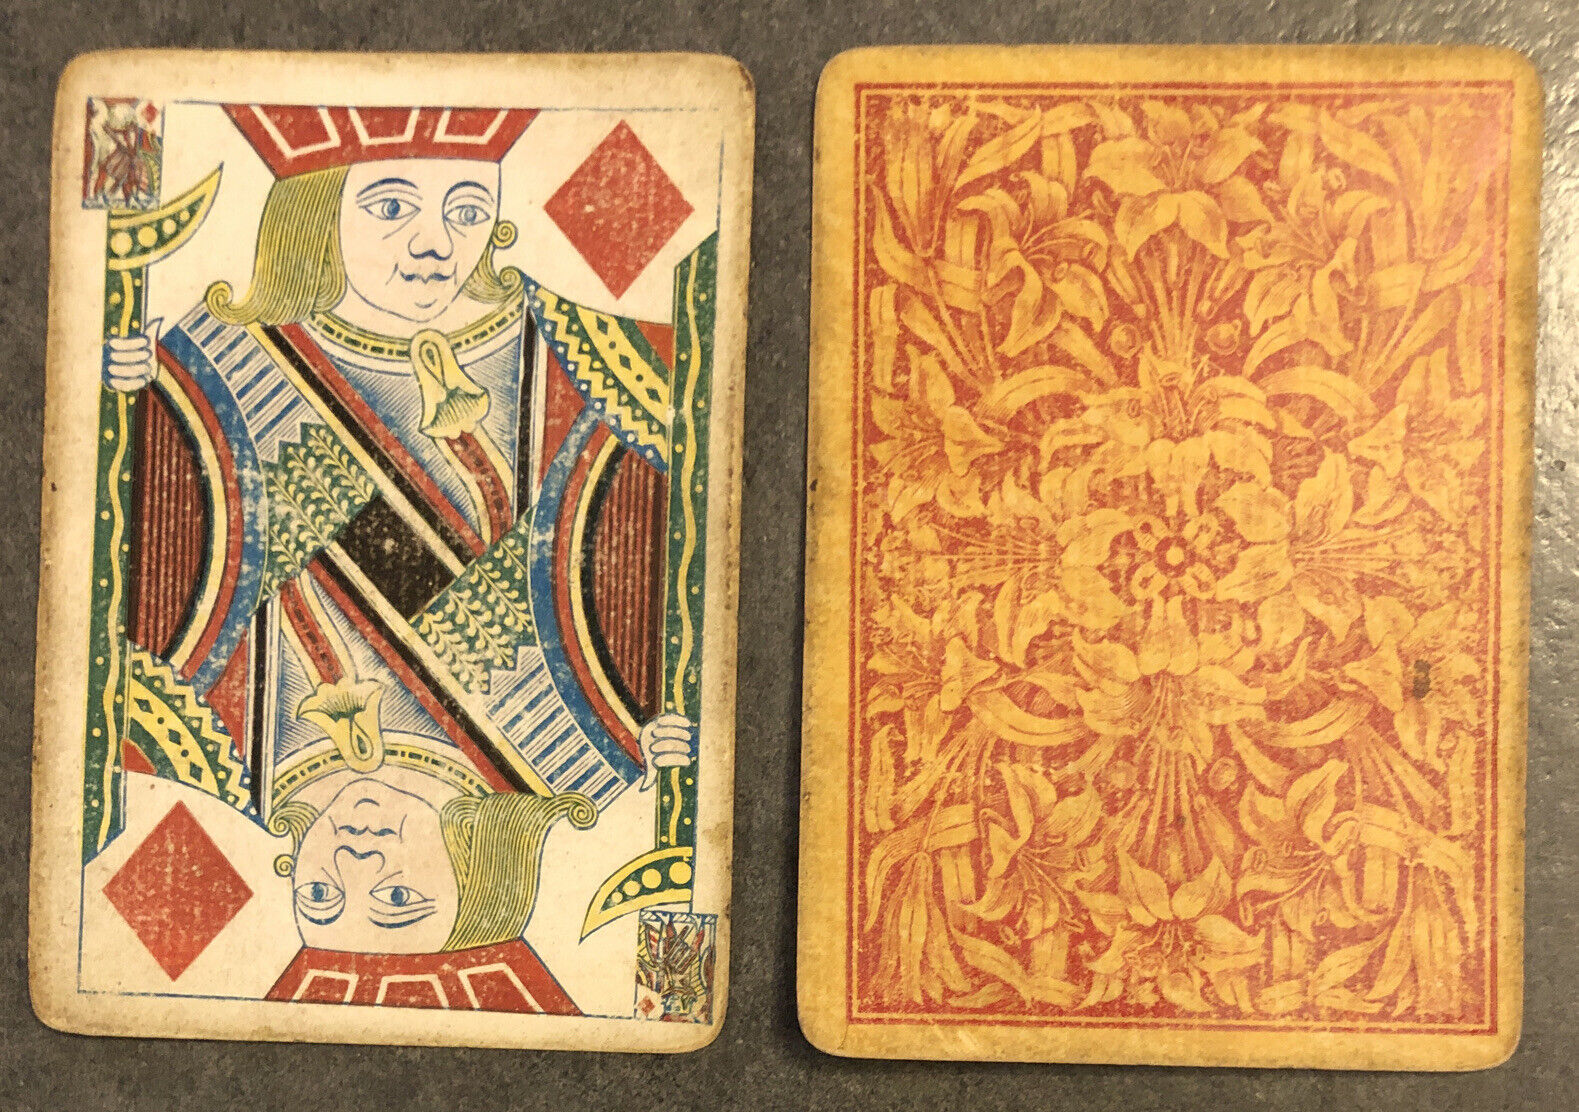 TWO ORIGINAL 1876 TRIPLICATE DOUGHERTY PLAYING CARDS POST CIVIL WAR OLD WEST